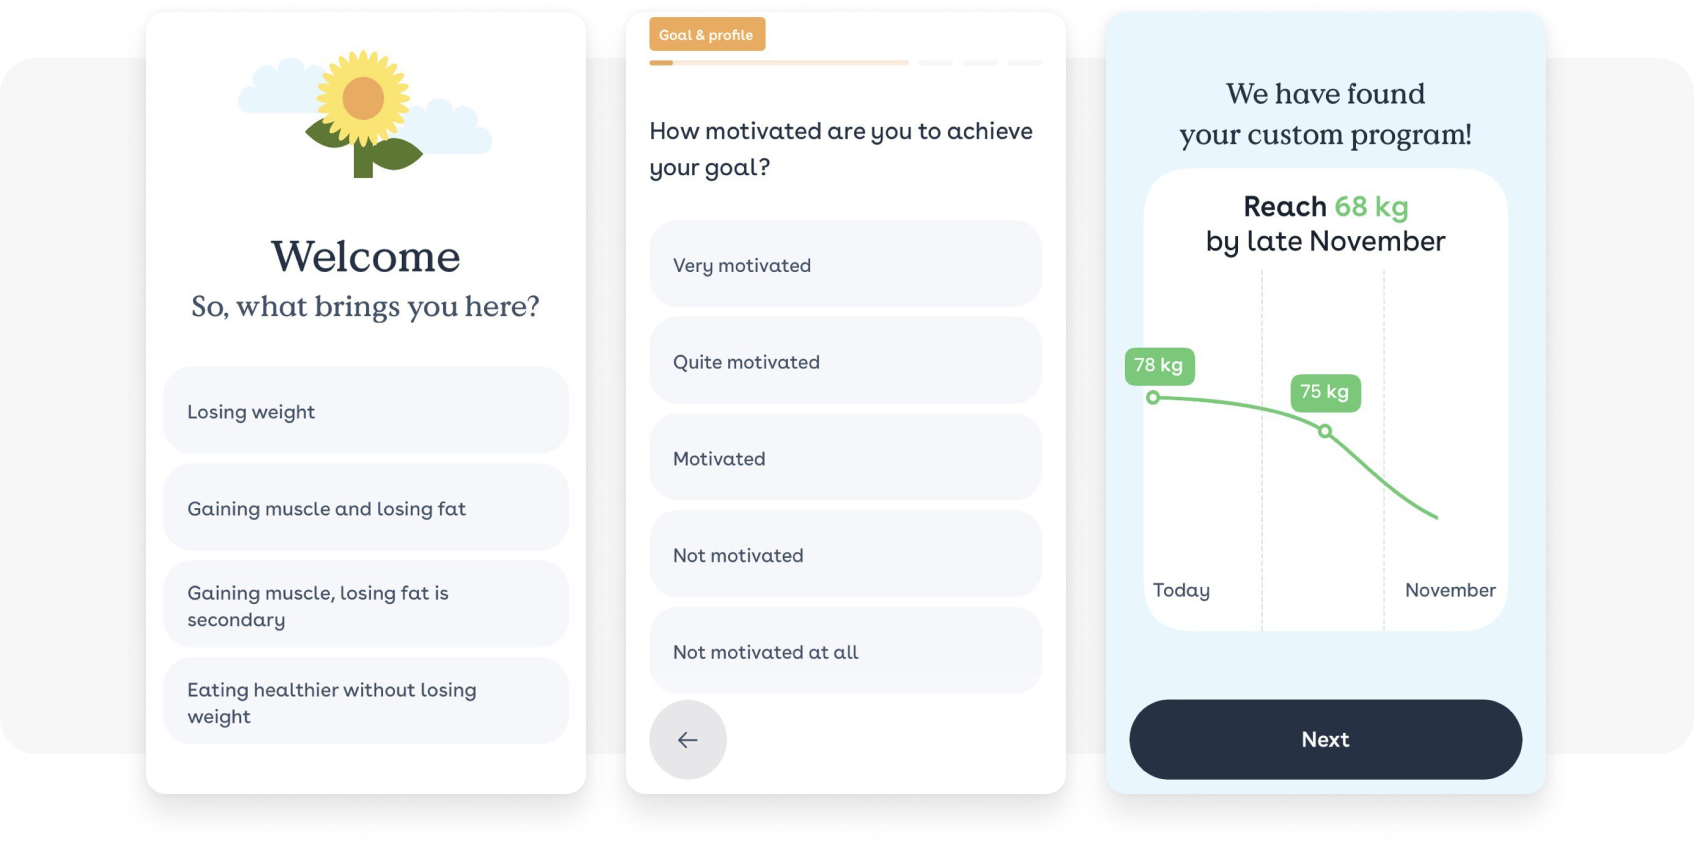 Automated onboarding from a health app